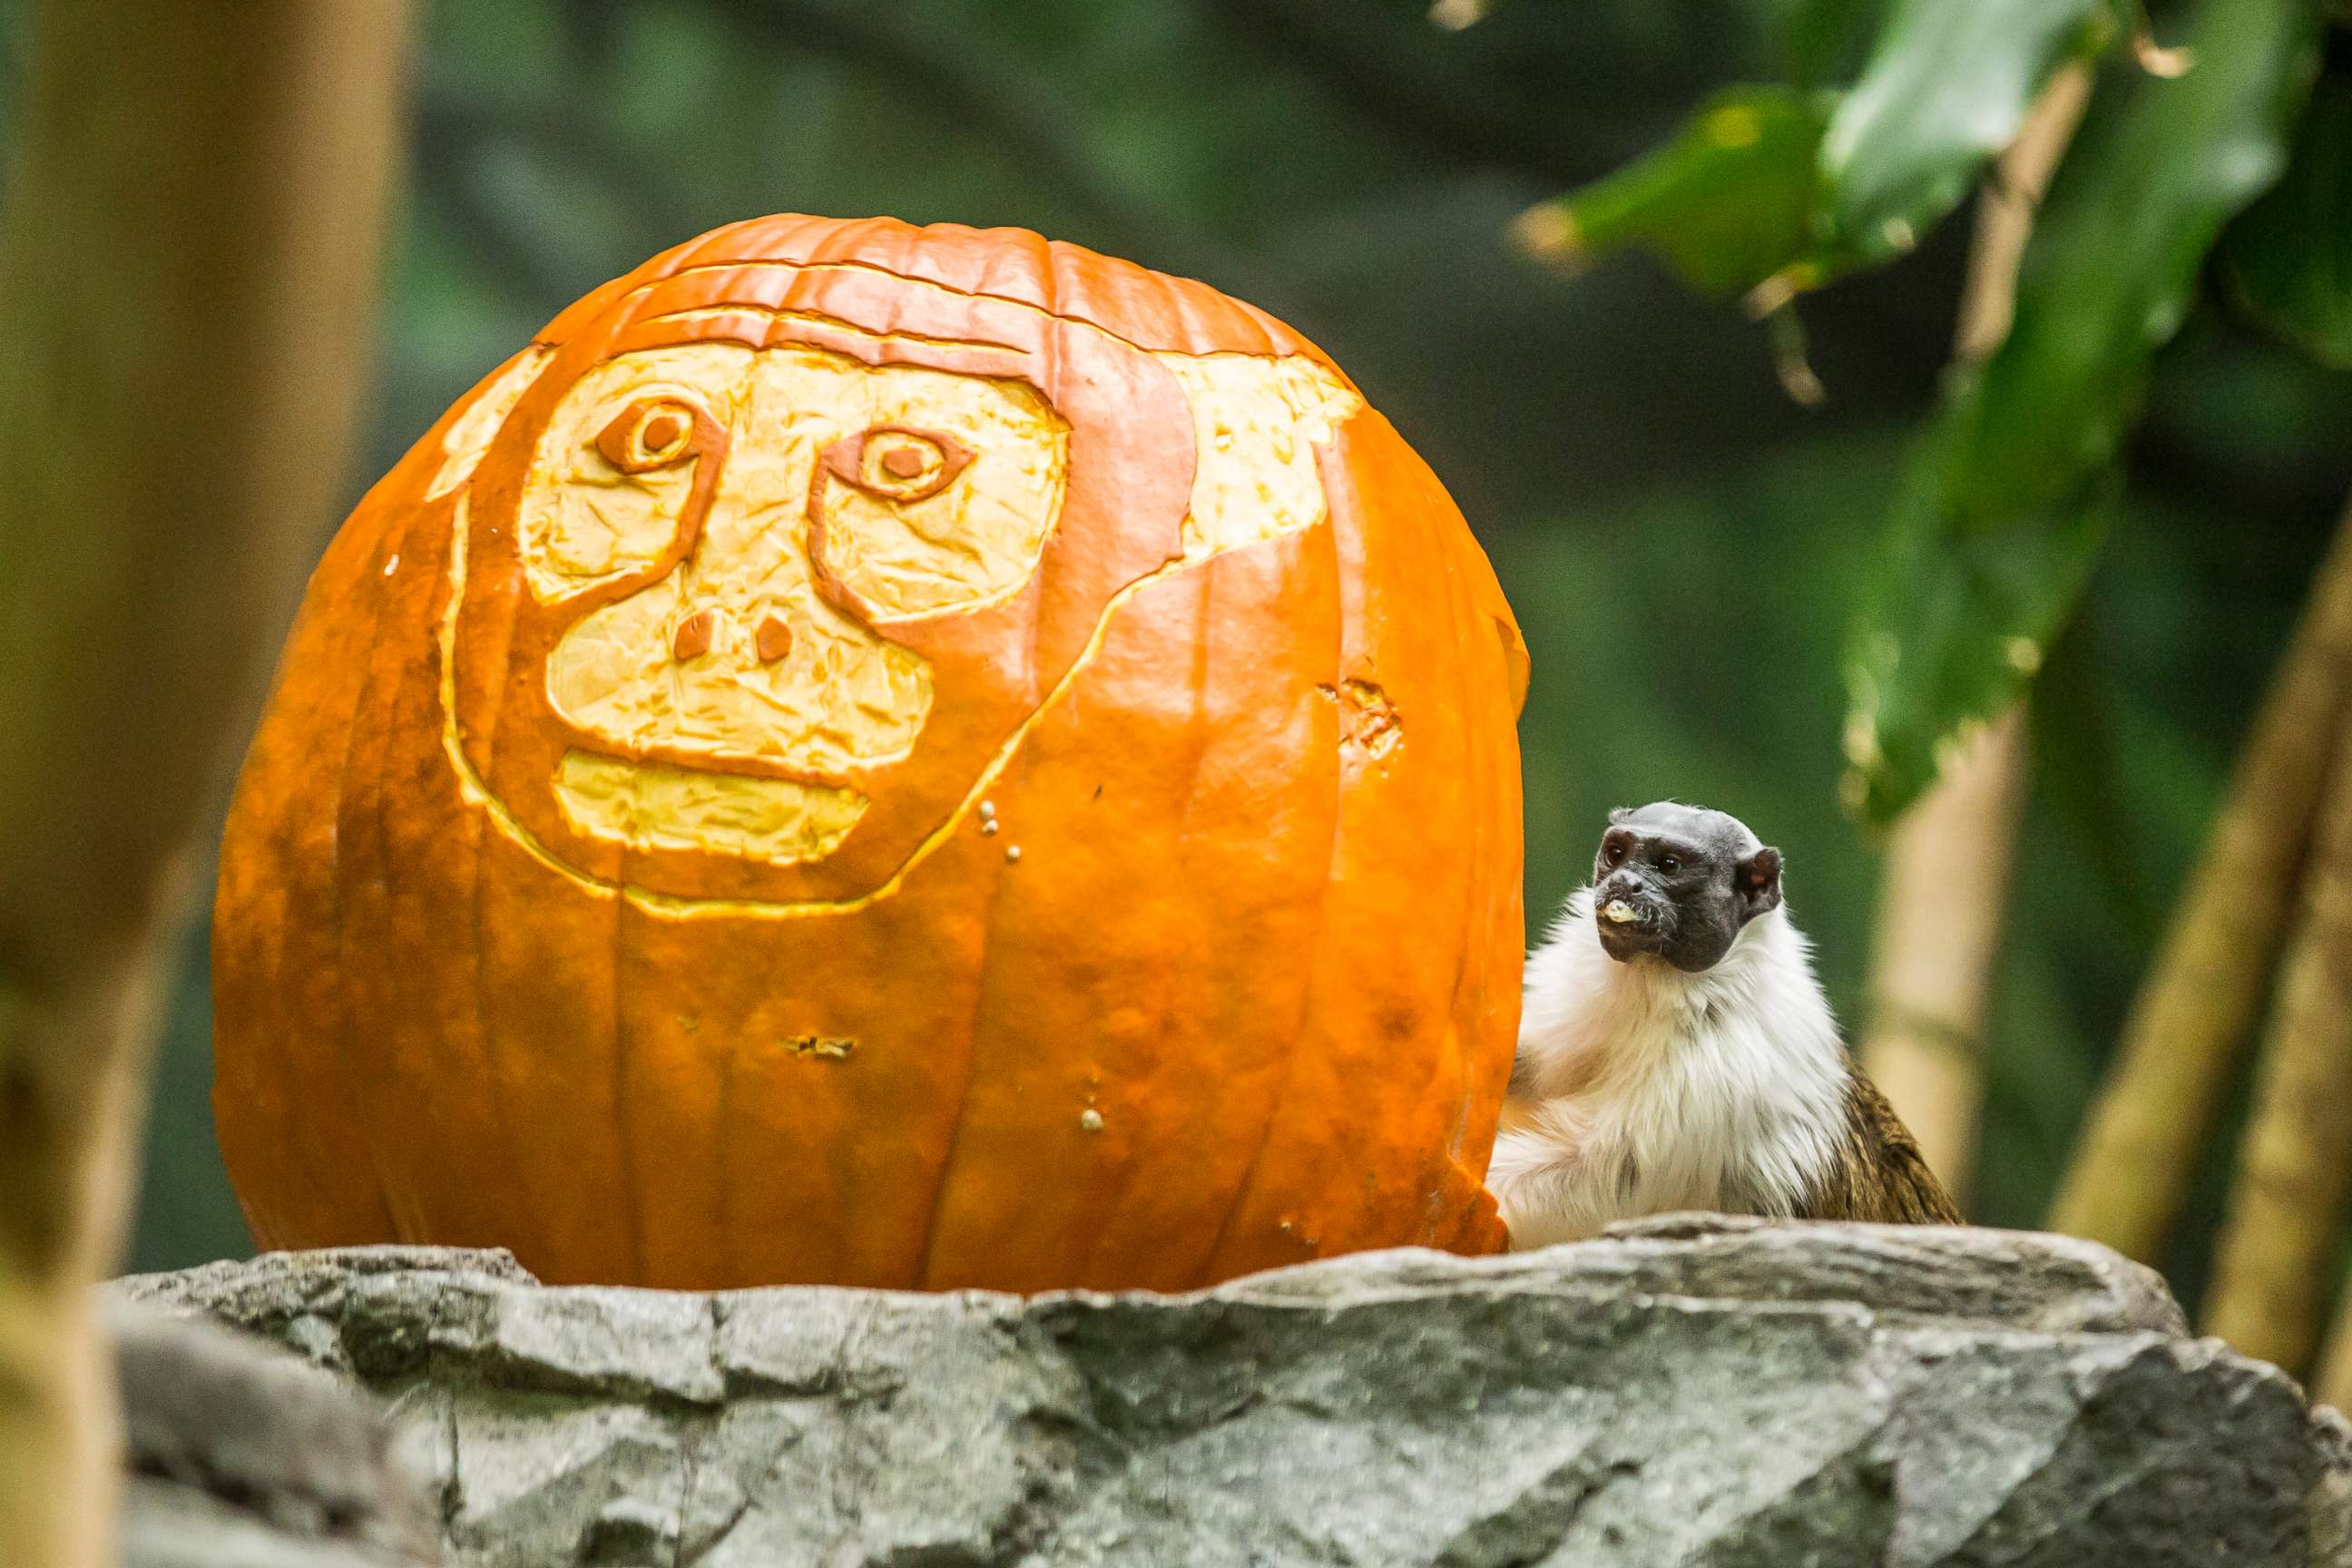 PHOTO: A pied tamarin posed next to a carved pumpkin at the Lincoln Park Zoo in Chicago.